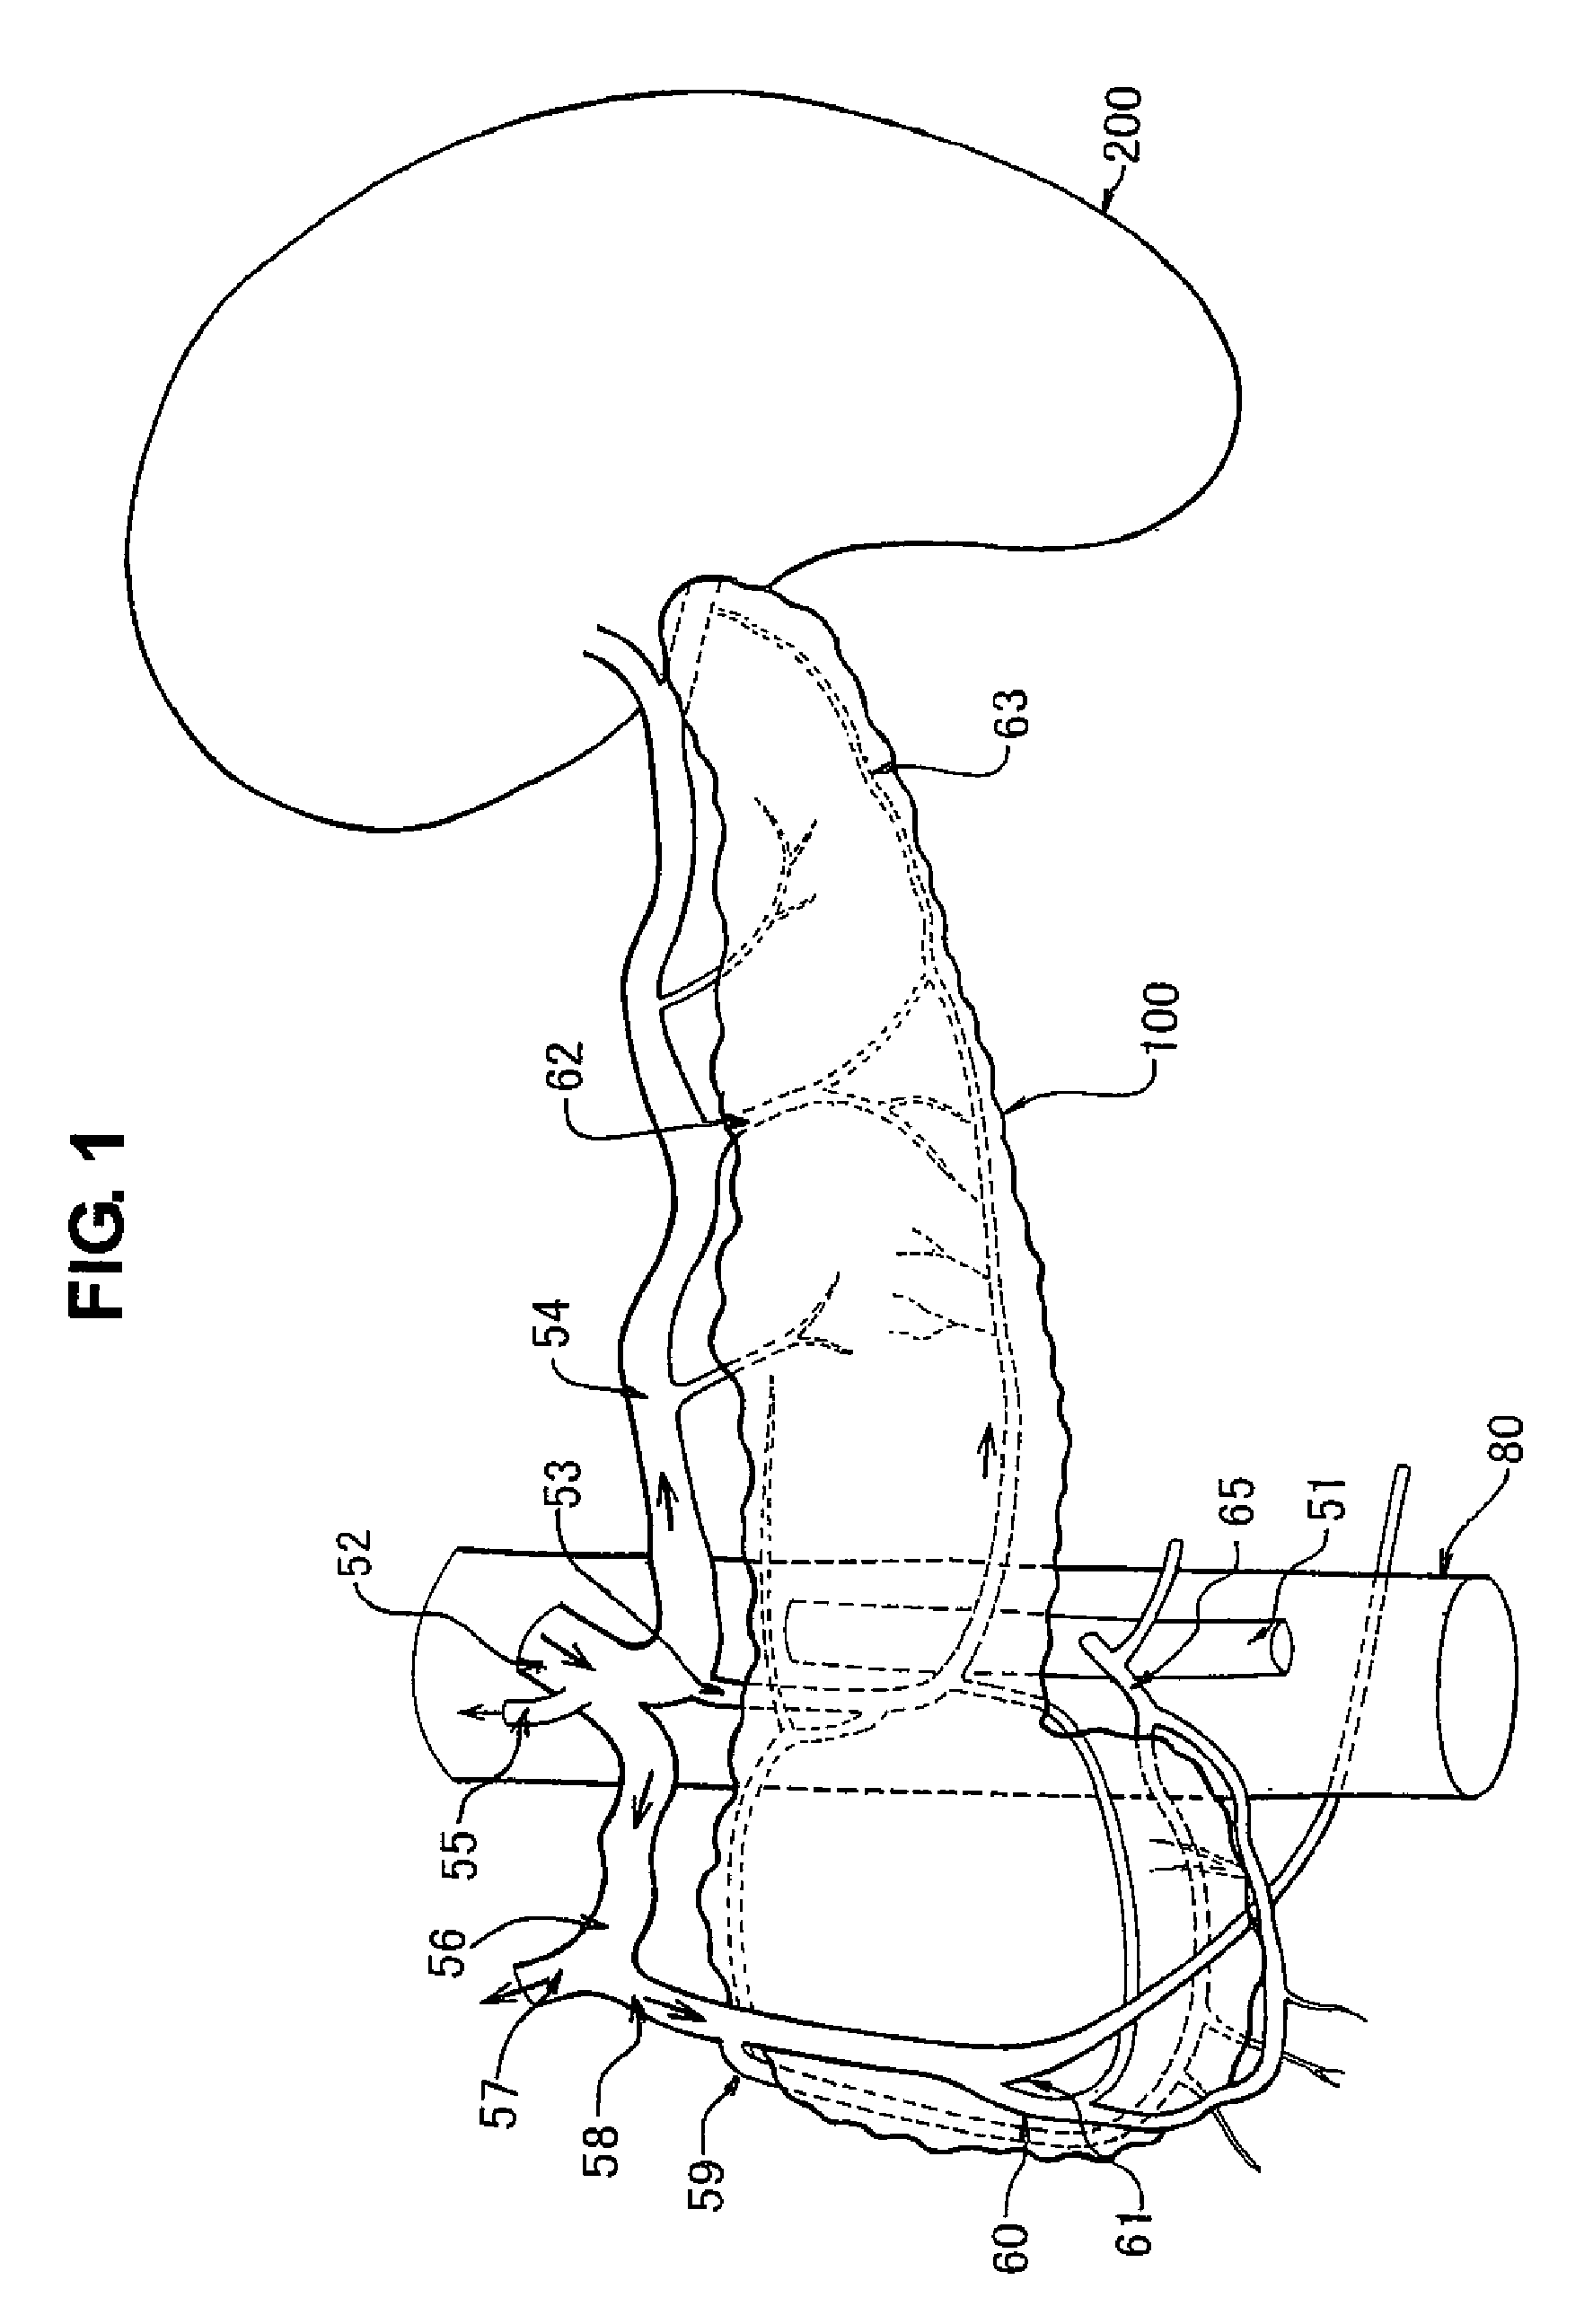 Perfusion System for Pancreas Treatment